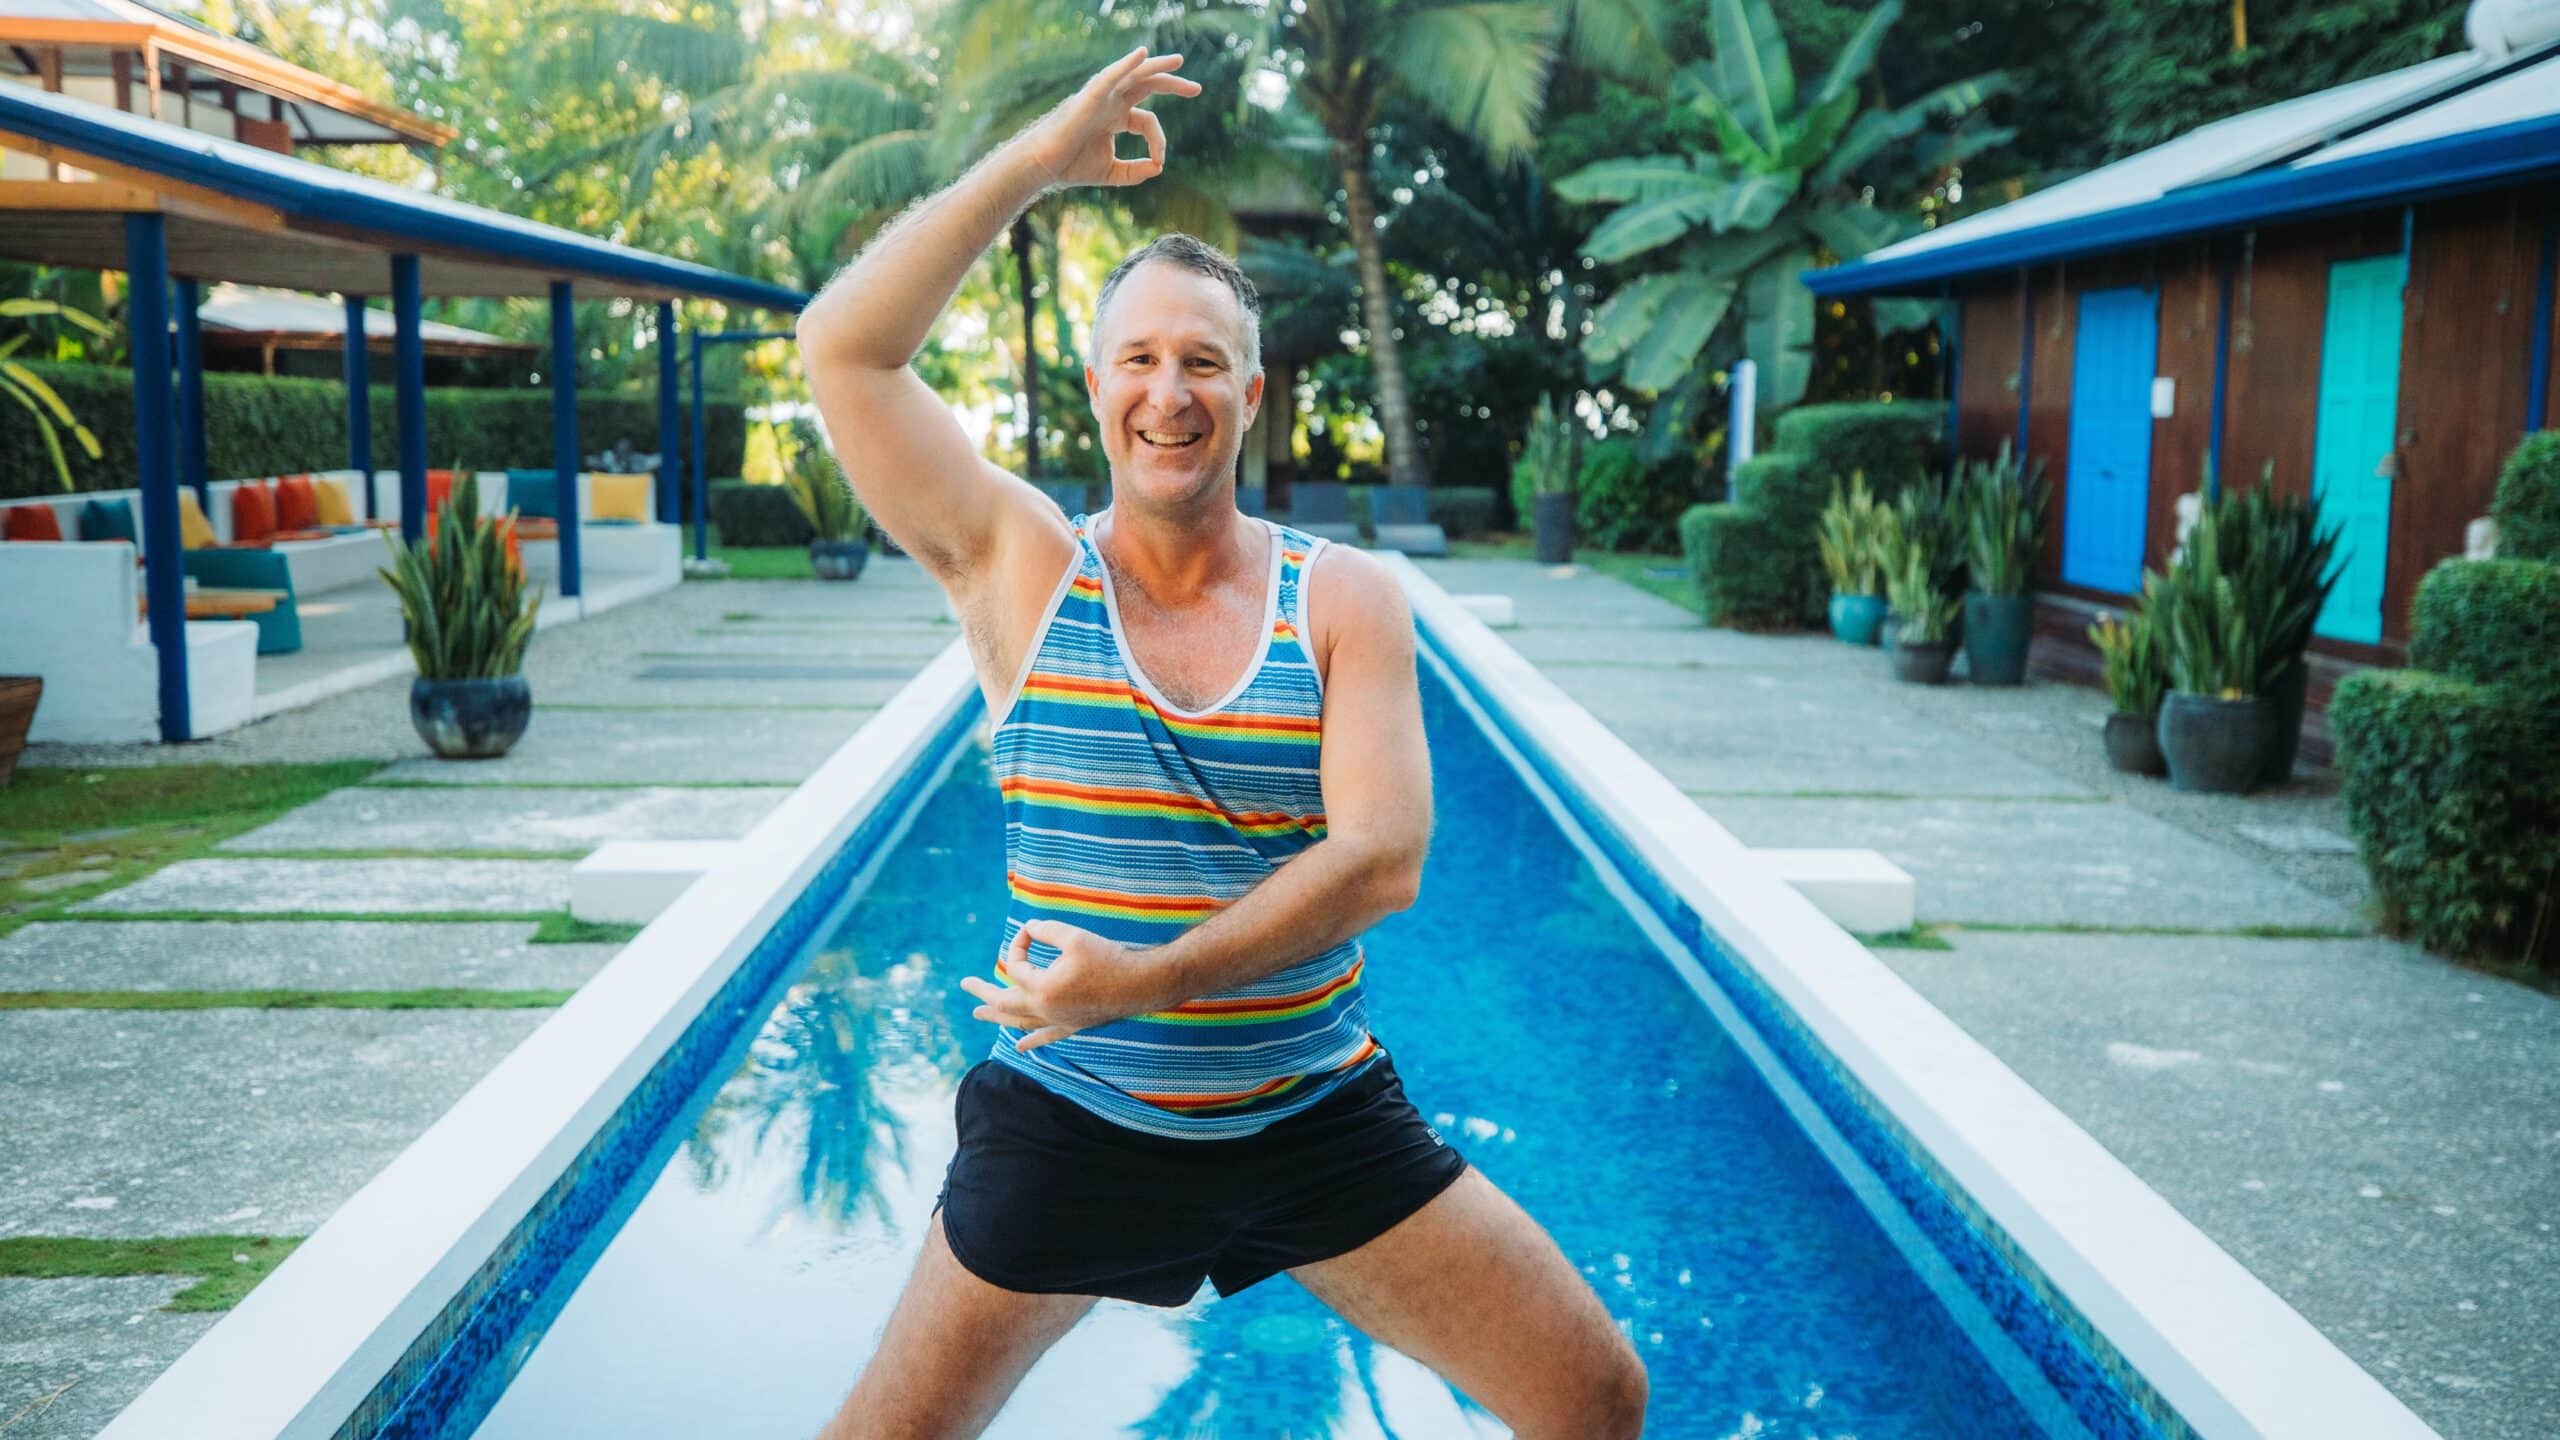 Yogi Aaron holding a side lunge and mudra pose in front of Blue Osa's chemical free lap pool in Costa Rica.